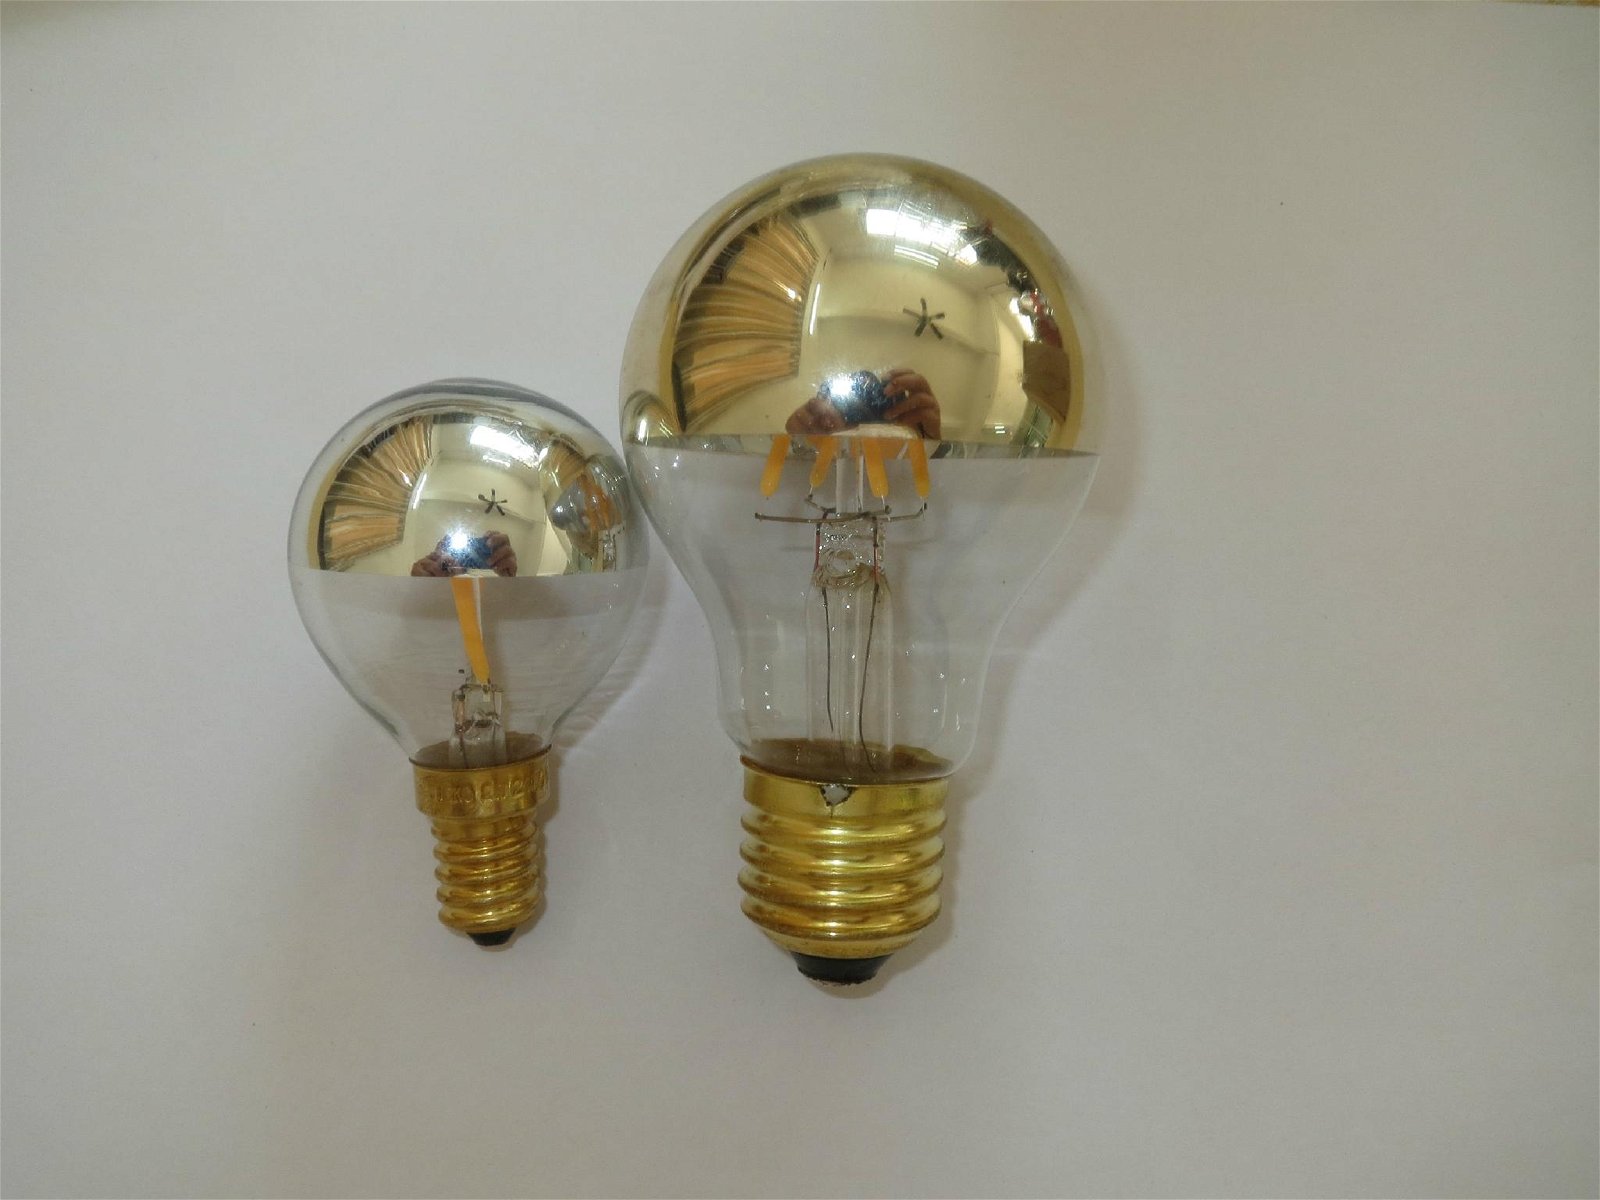 LED Filament Bulb - Half Silver -dimmable